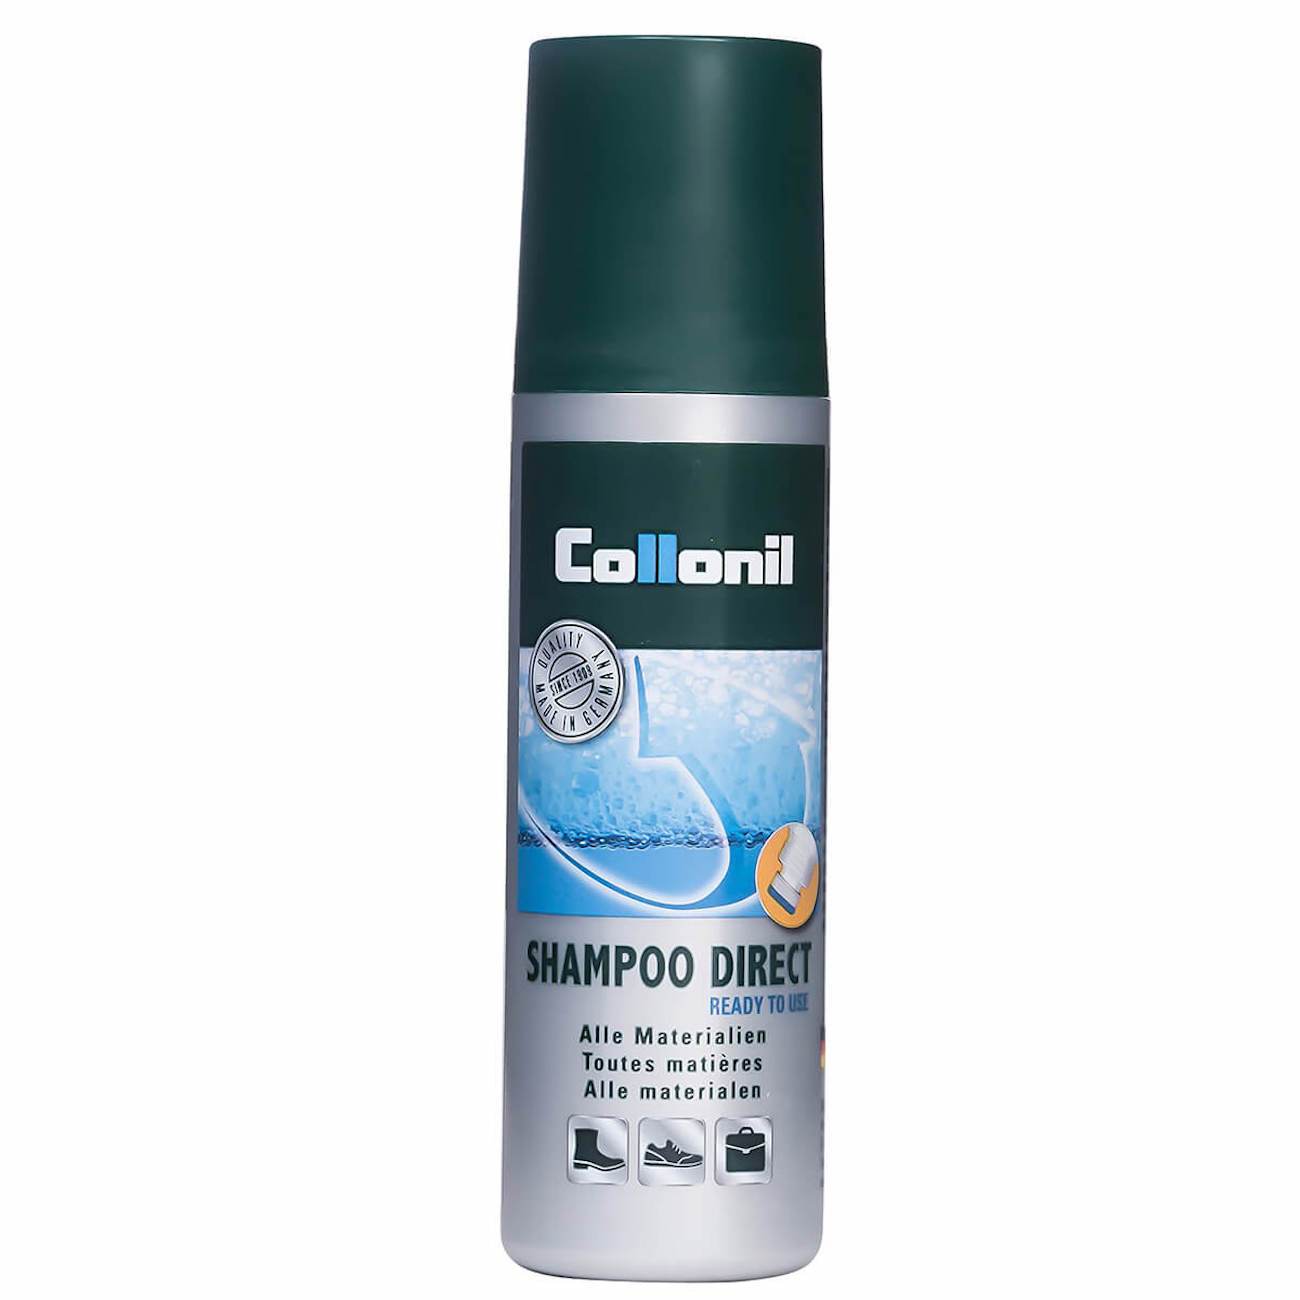 Collonil, Shampoo Direct, 100ml Shoe Care Products Unassigned 